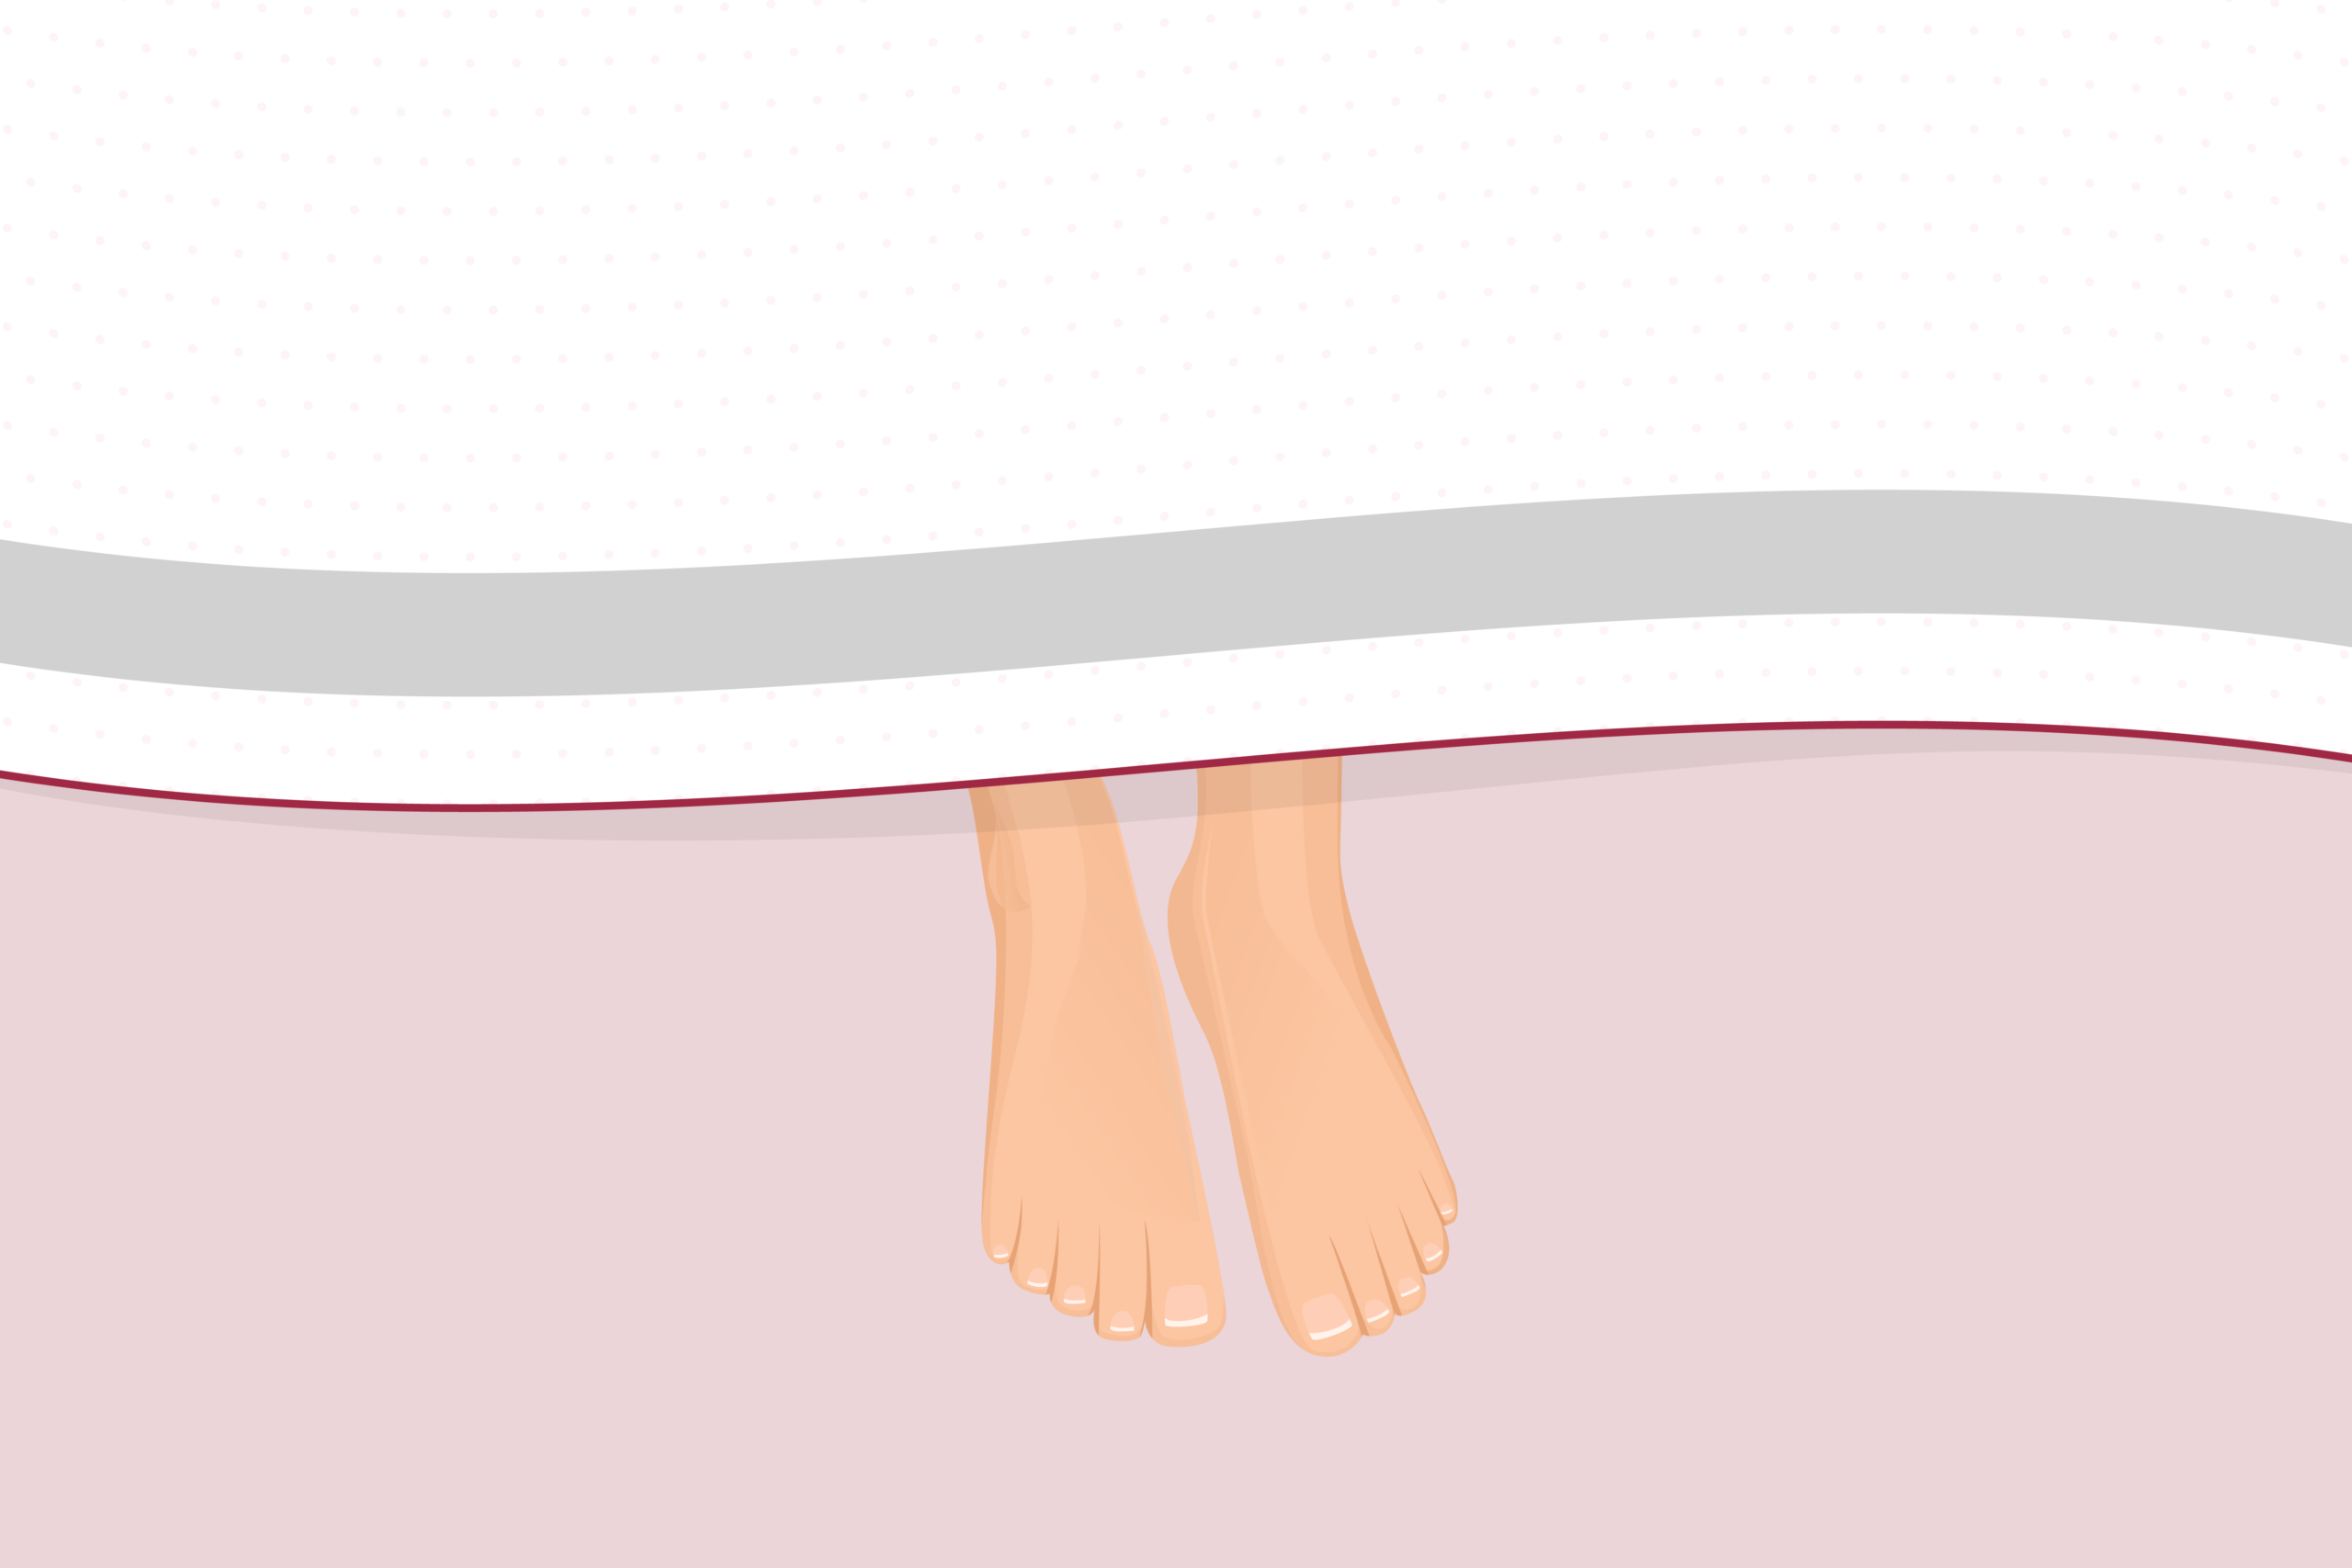 Why Does Sticking One Foot Out of the Bed Help You Sleep?